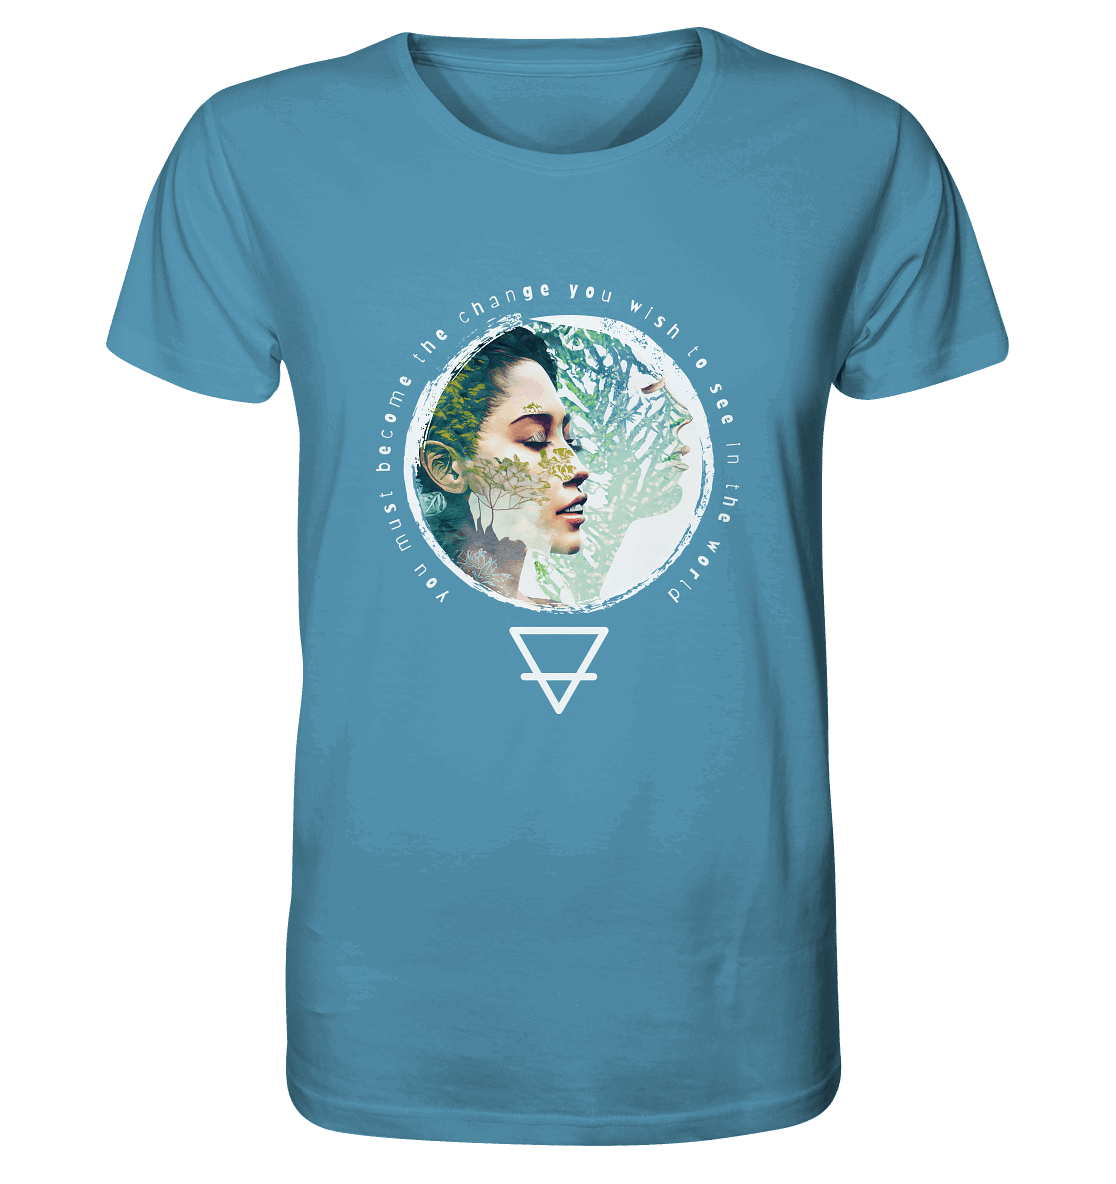 Nature - You must become the change you wish to see in the world - Organic Shirt